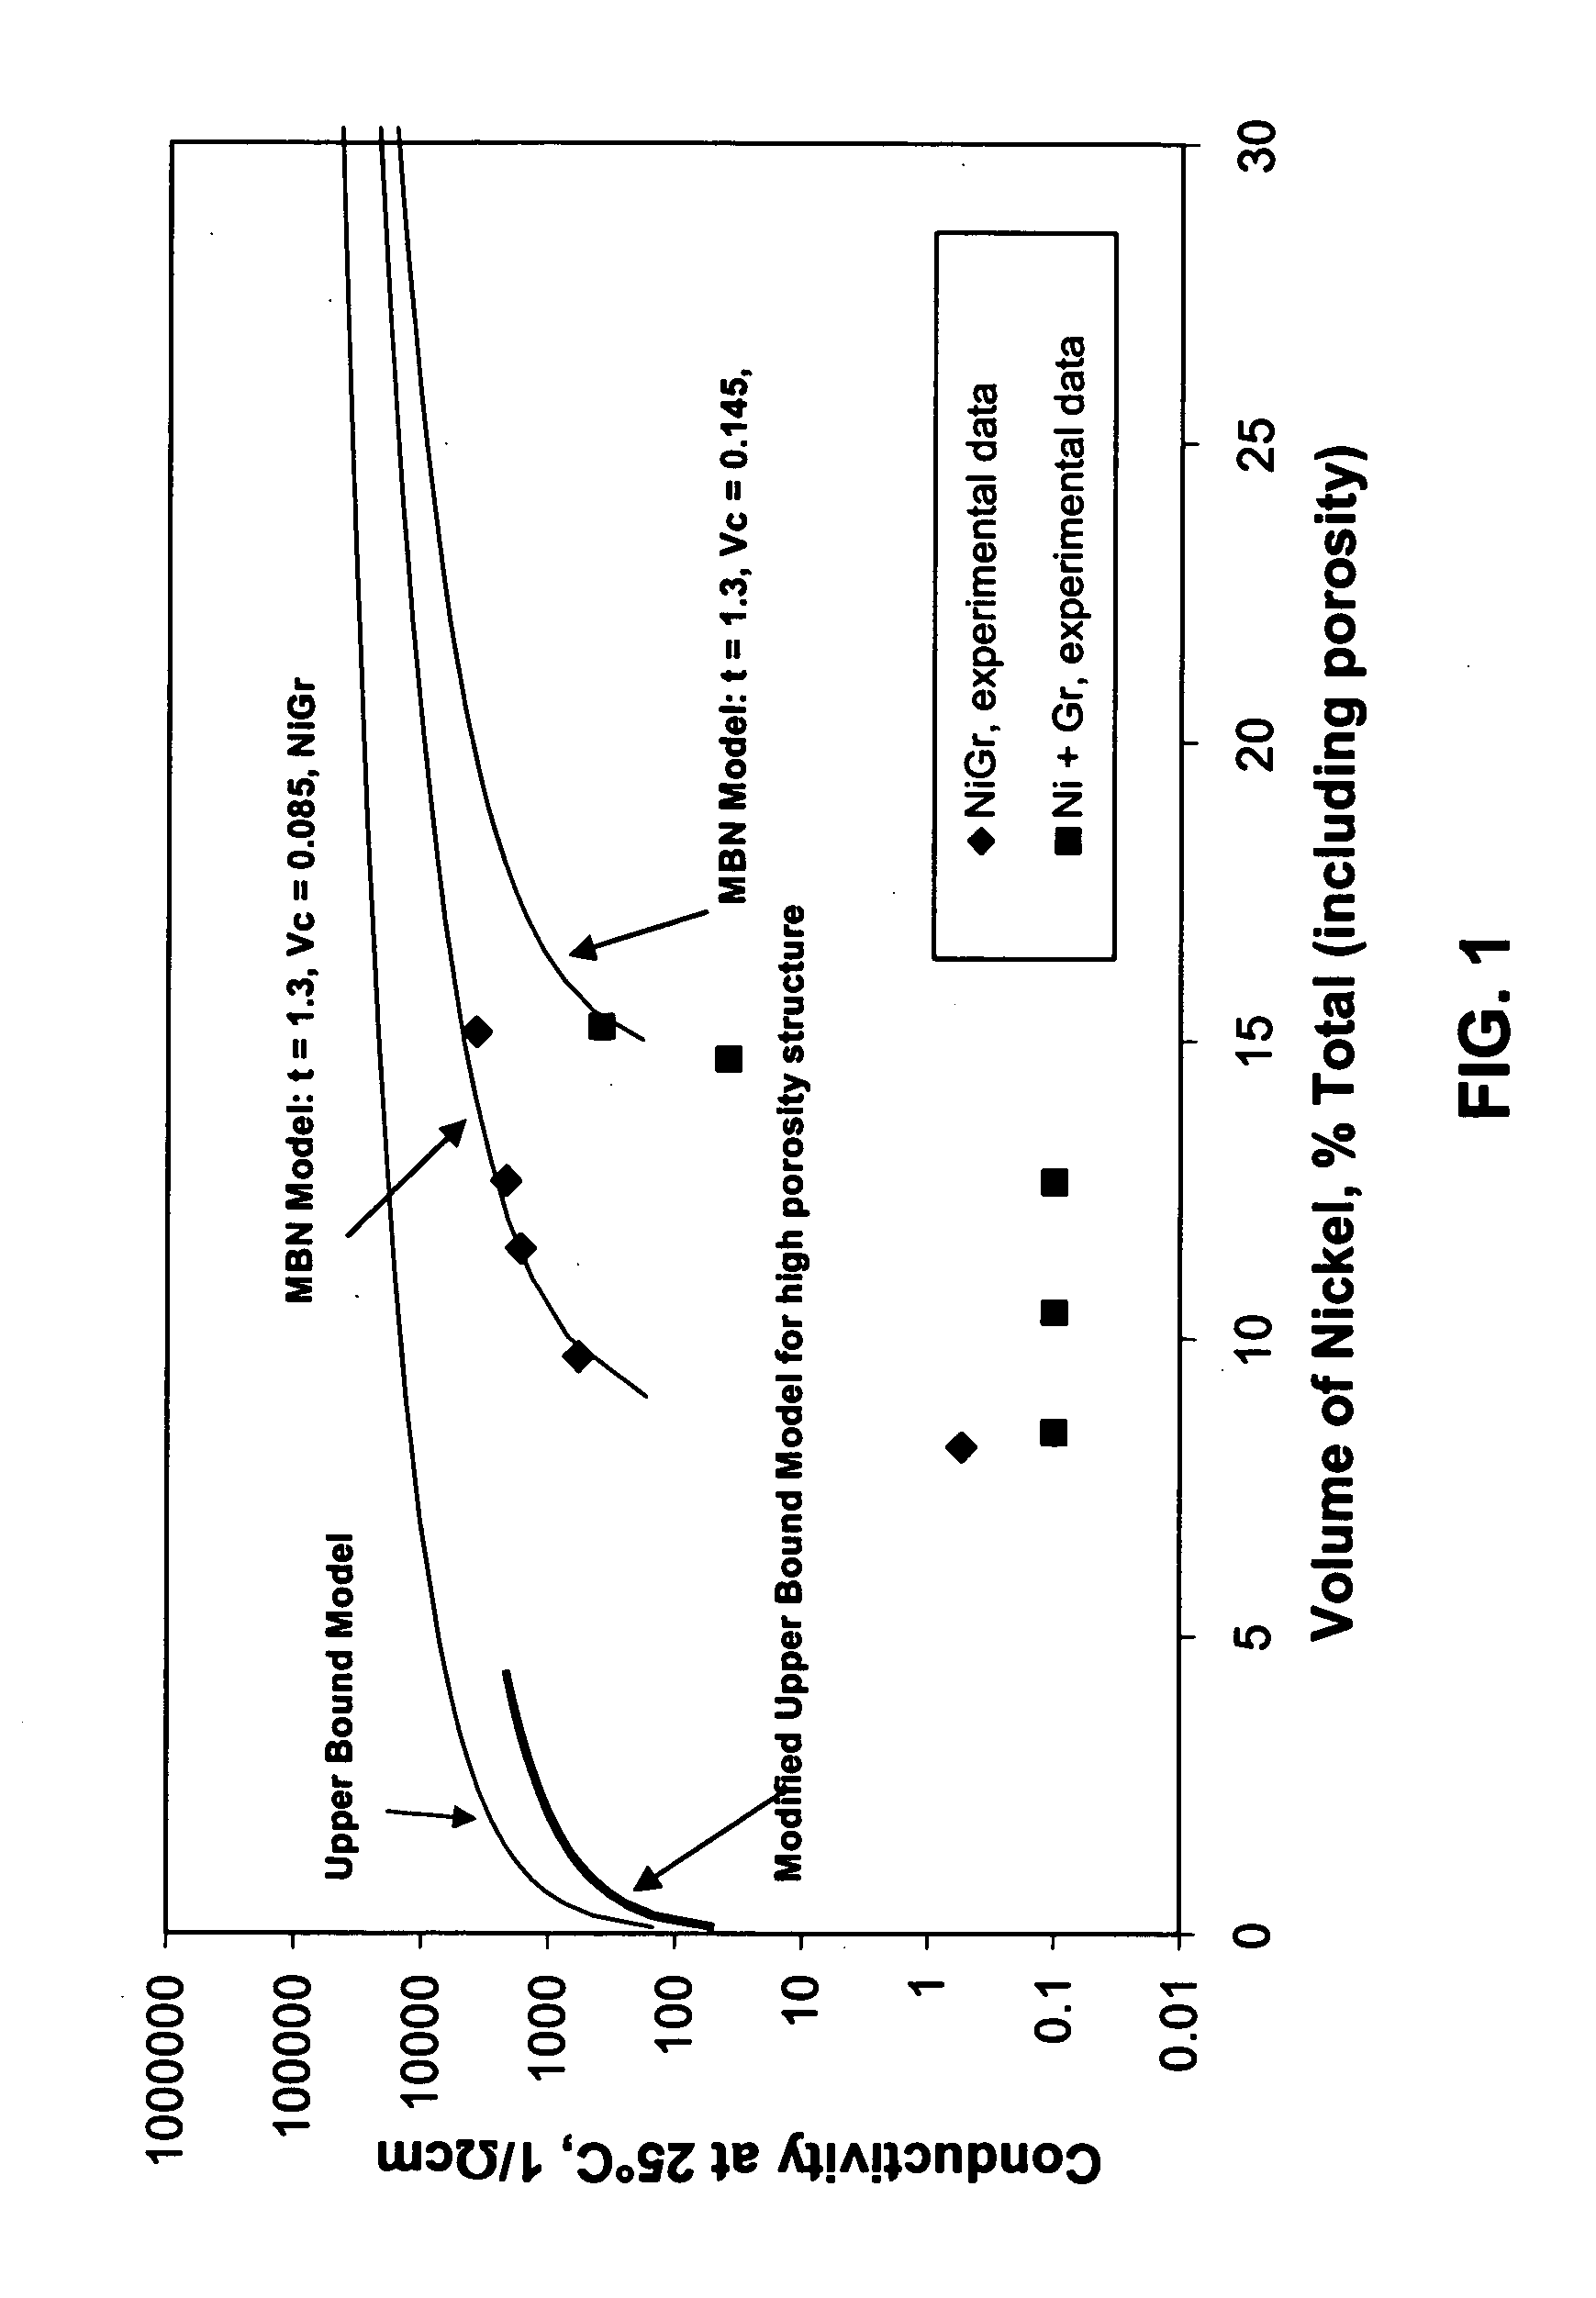 Nickel foam and felt-based anode for solid oxide fuel cells